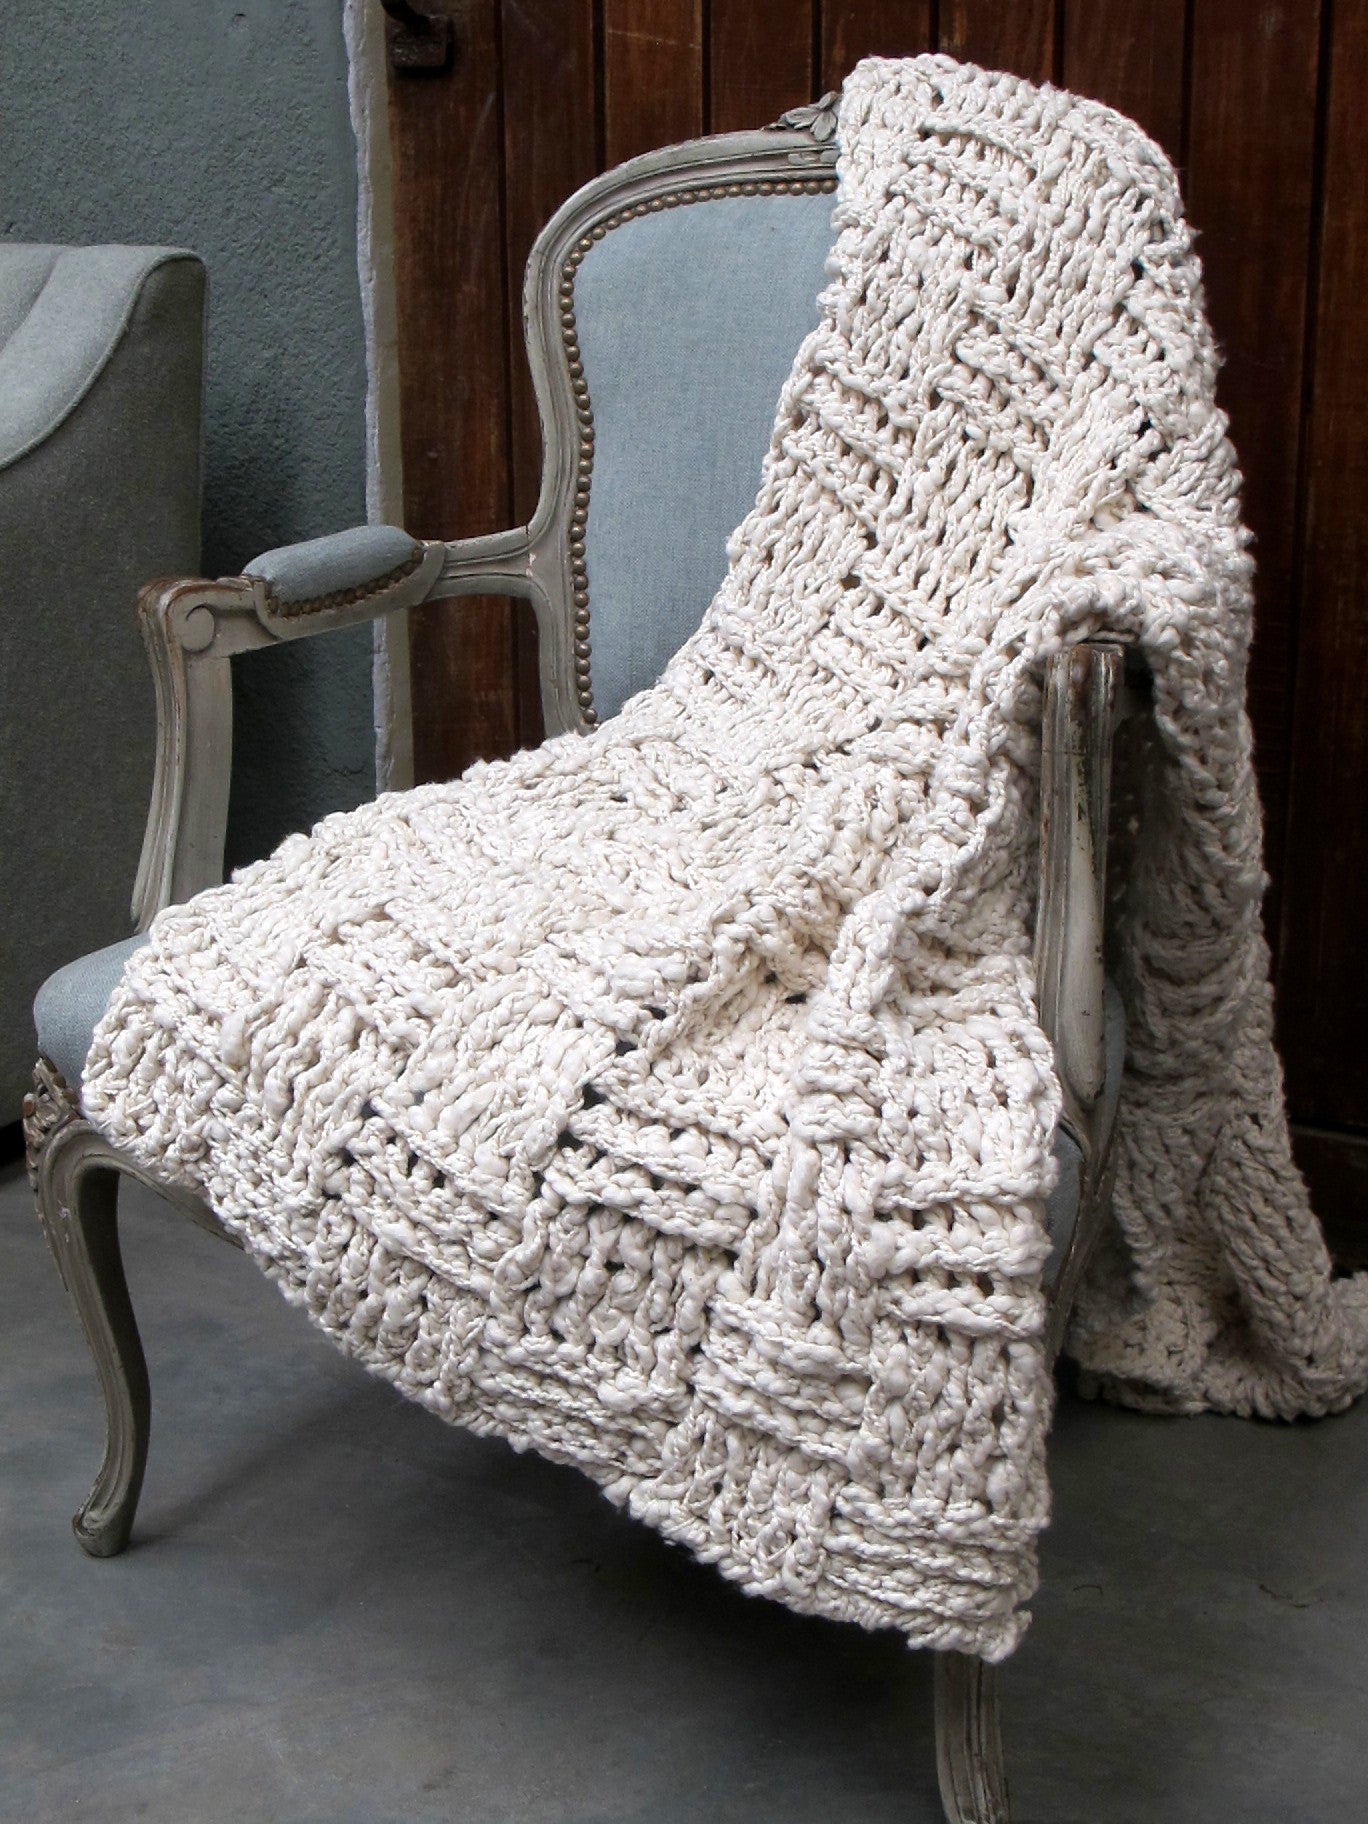 Chess Chunky Knit Throw Blanket